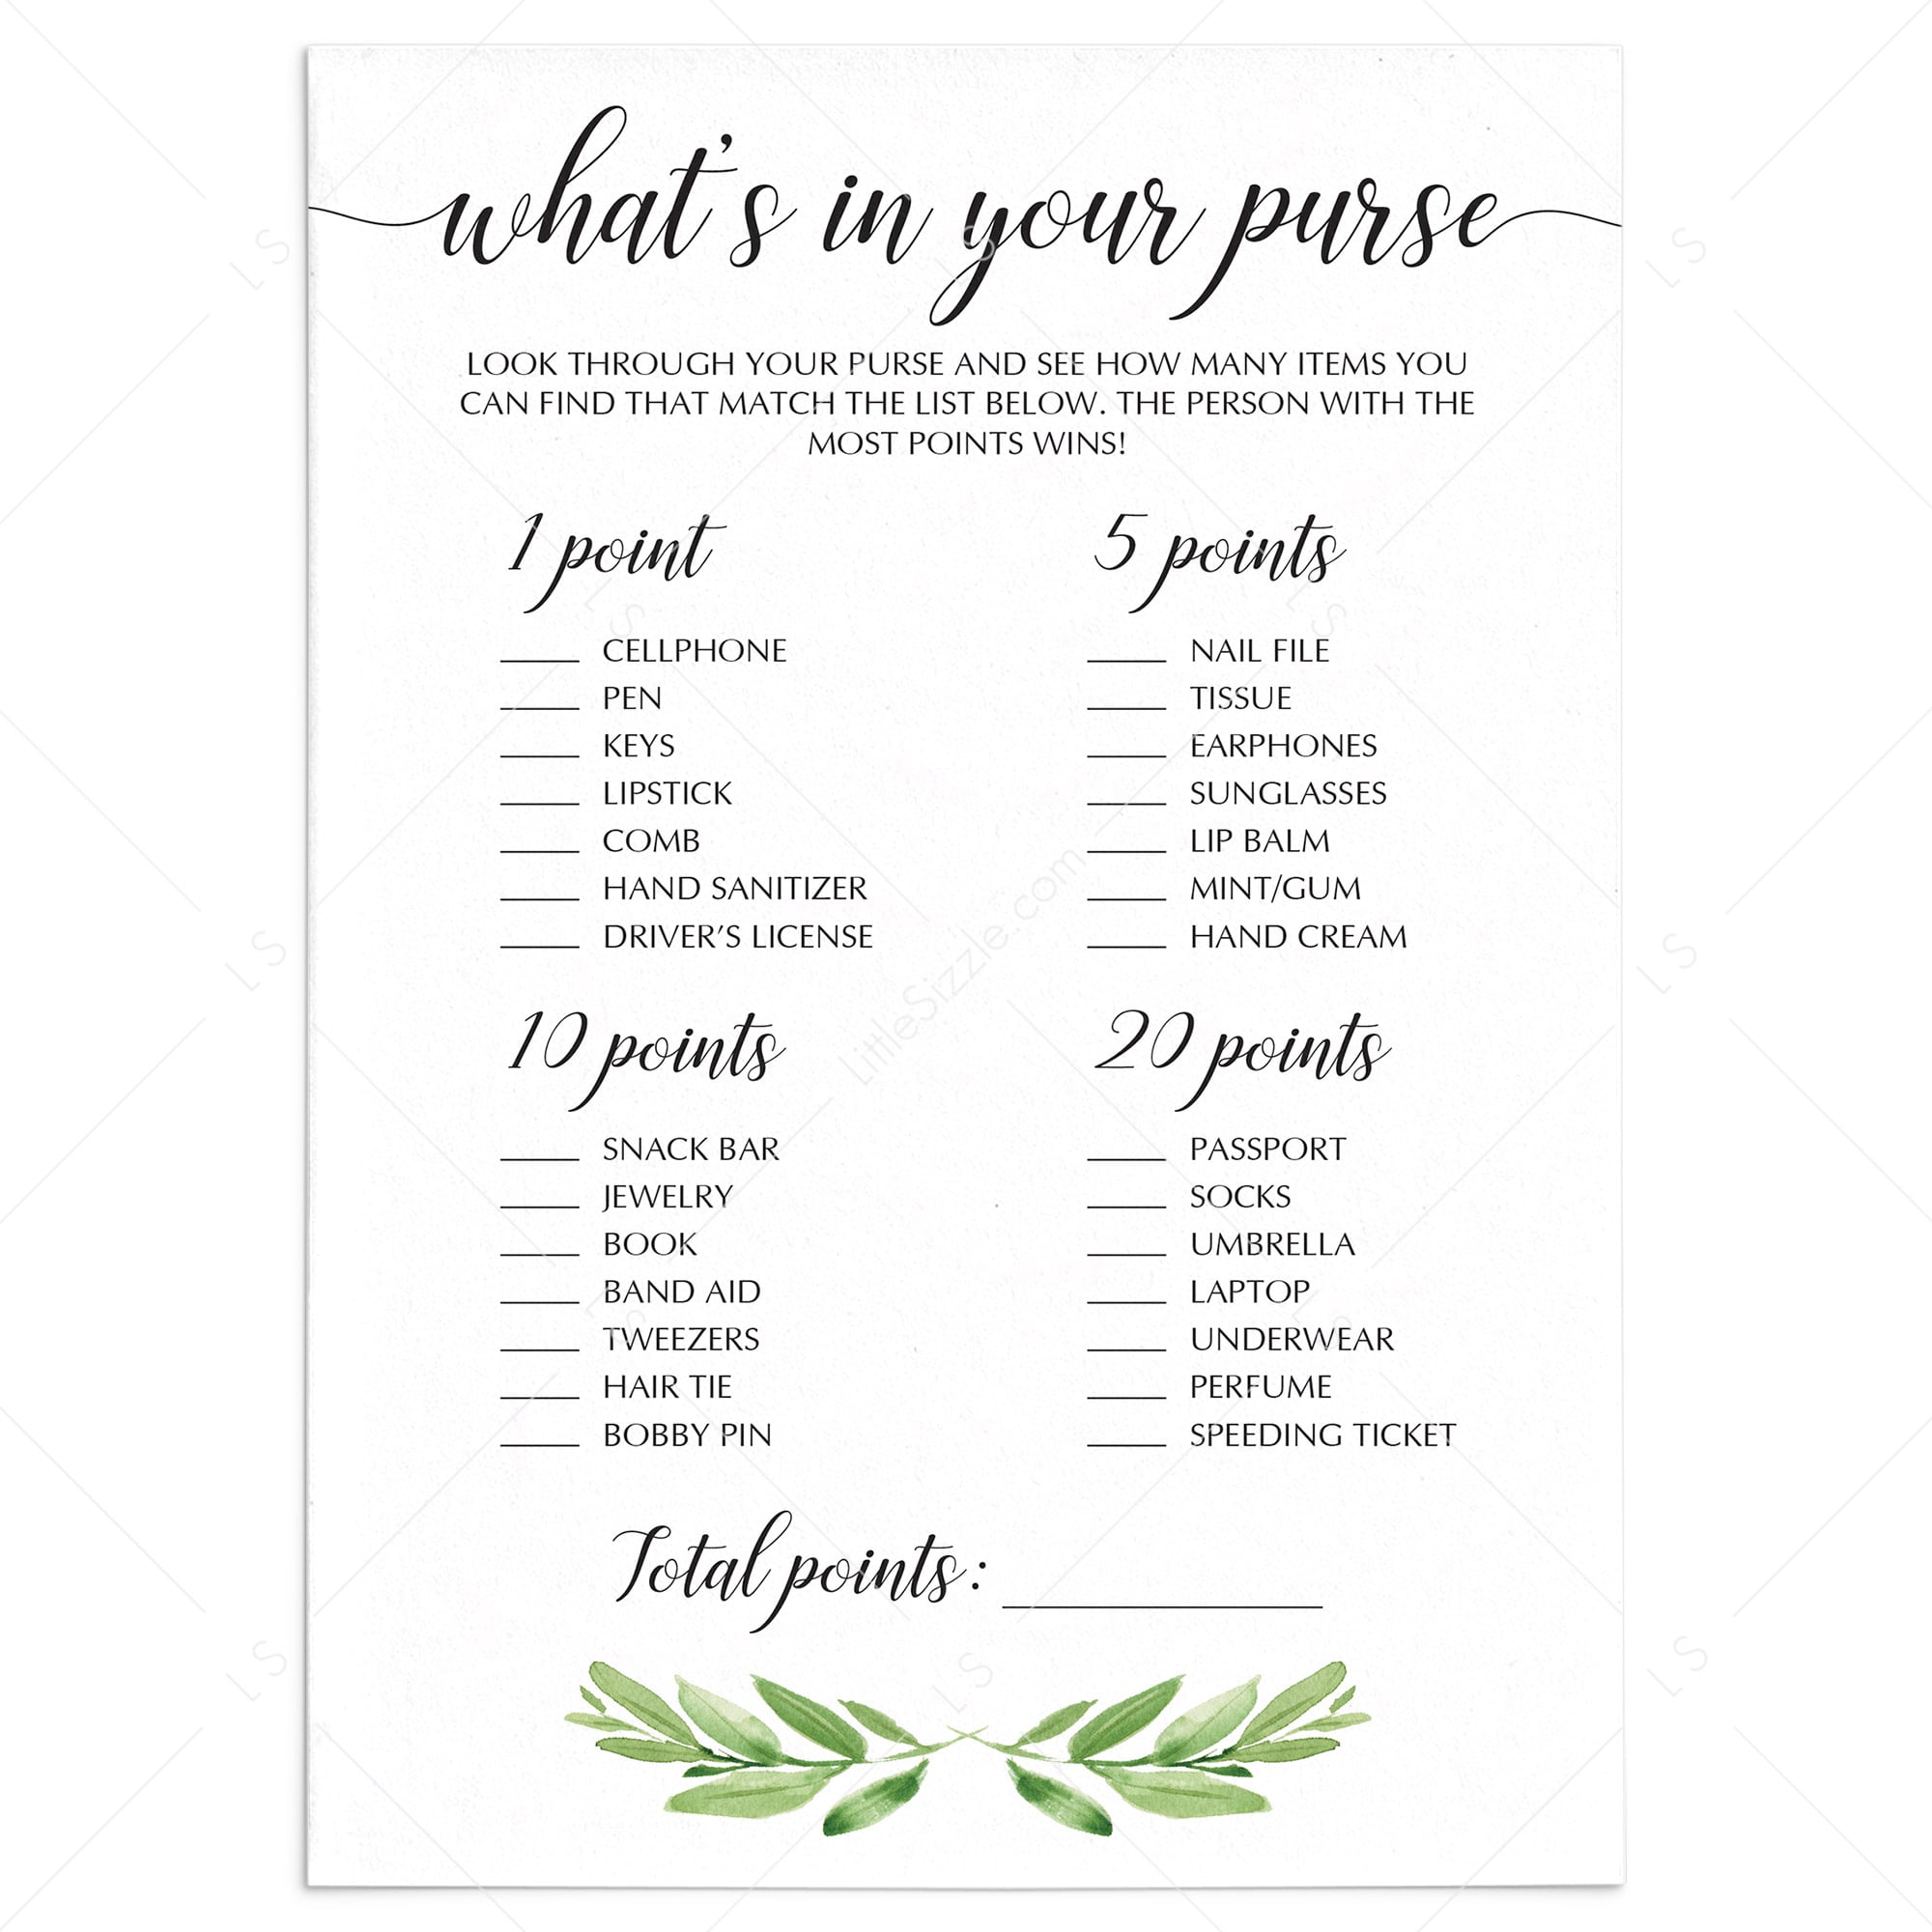 whats in your purse bridal shower game digital file by LittleSizzle